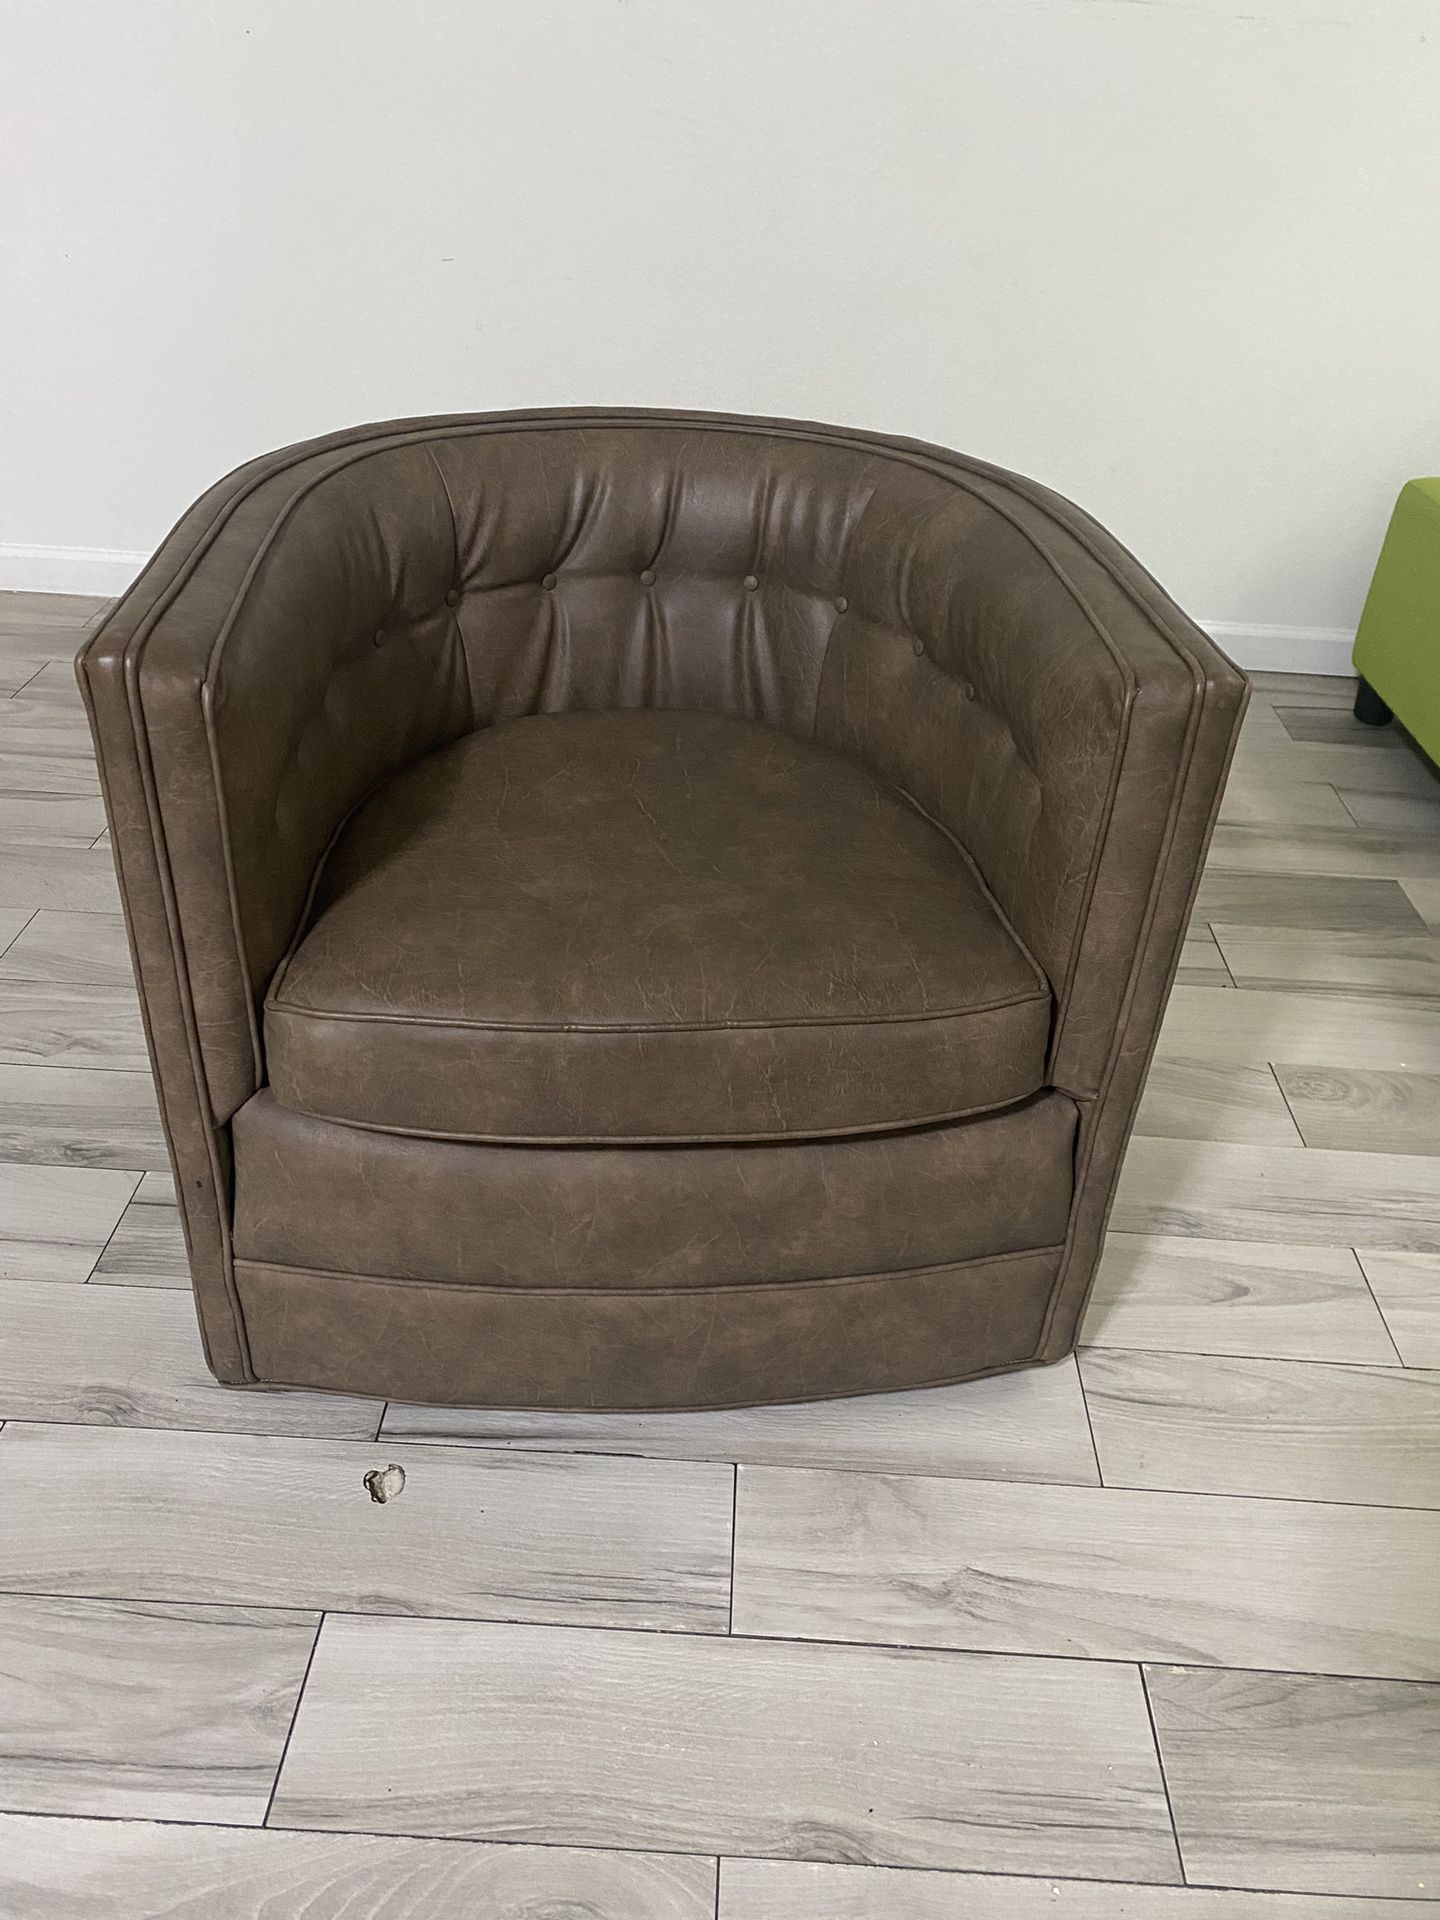 Small Leather Chair 